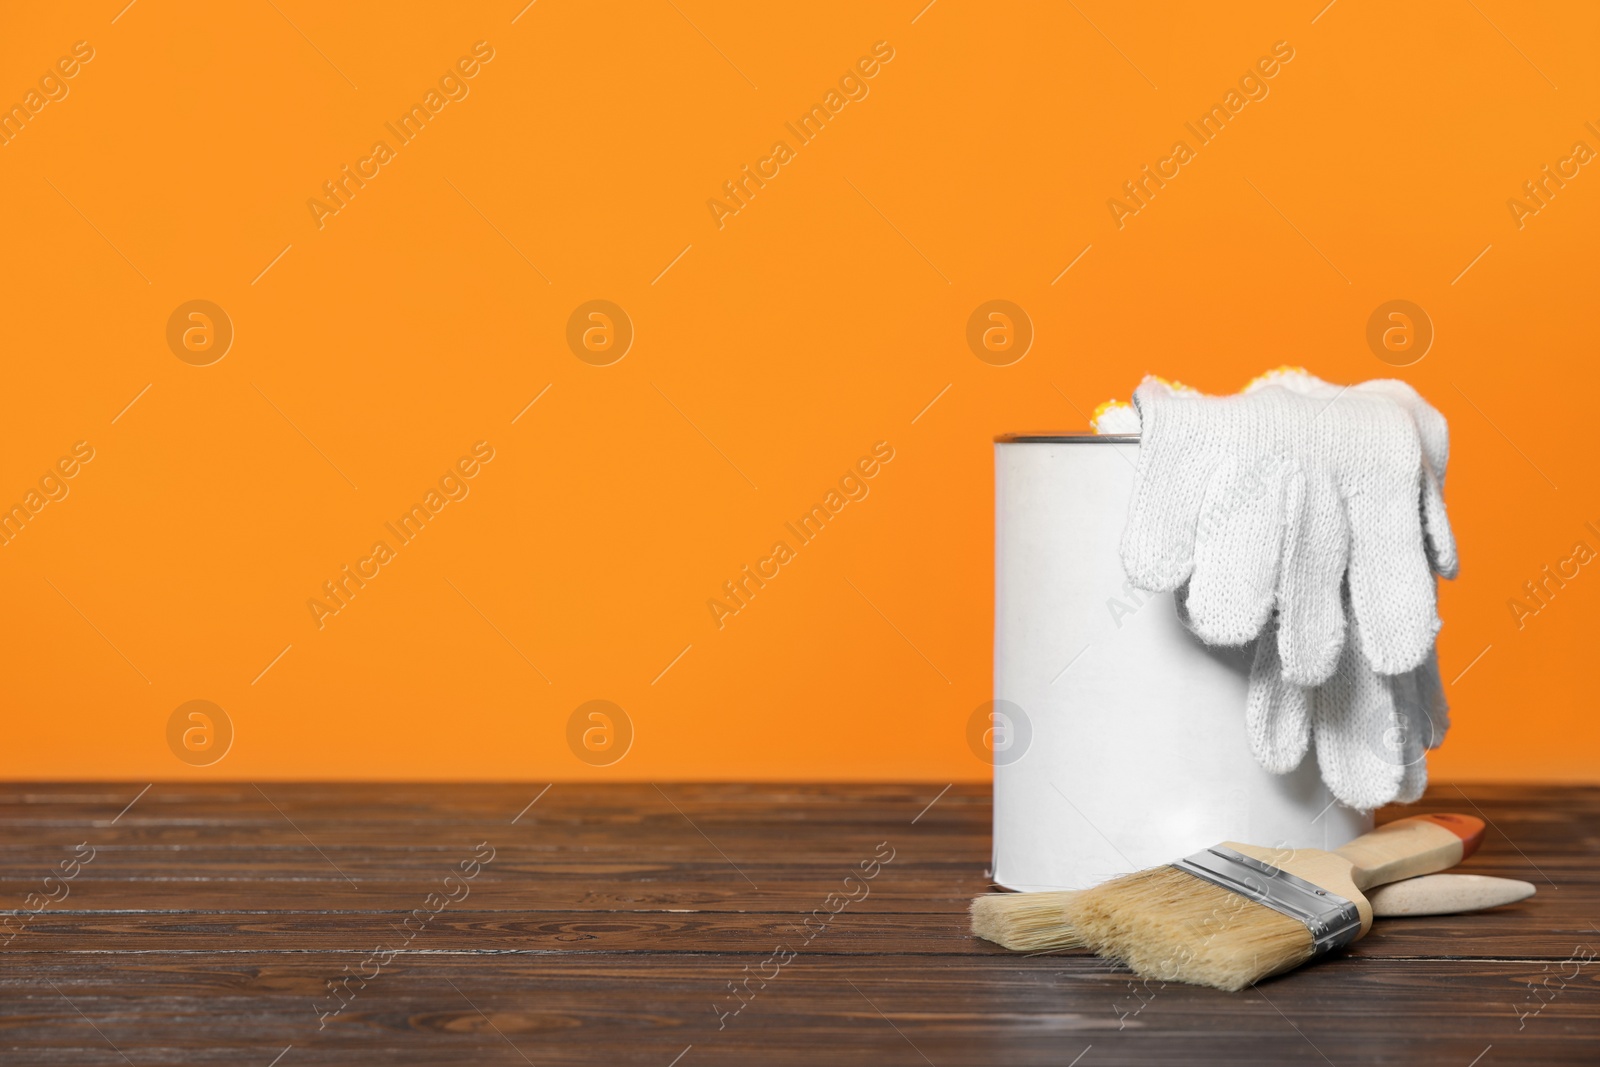 Photo of Can of paint, gloves and brushes on wooden table against orange background. Space for text